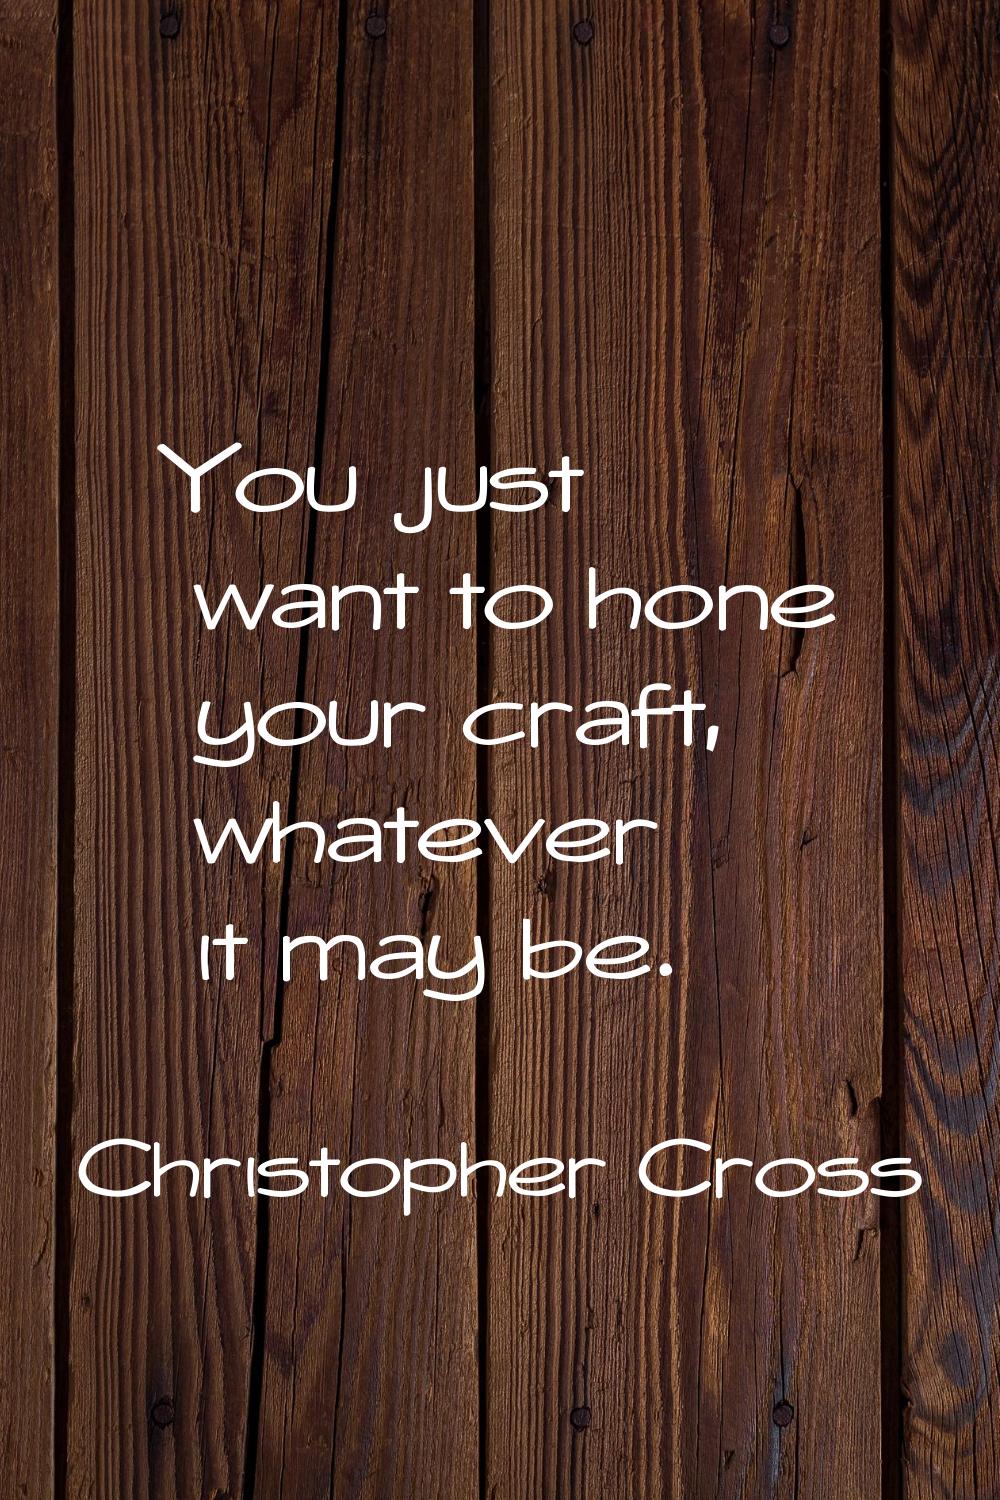 You just want to hone your craft, whatever it may be.